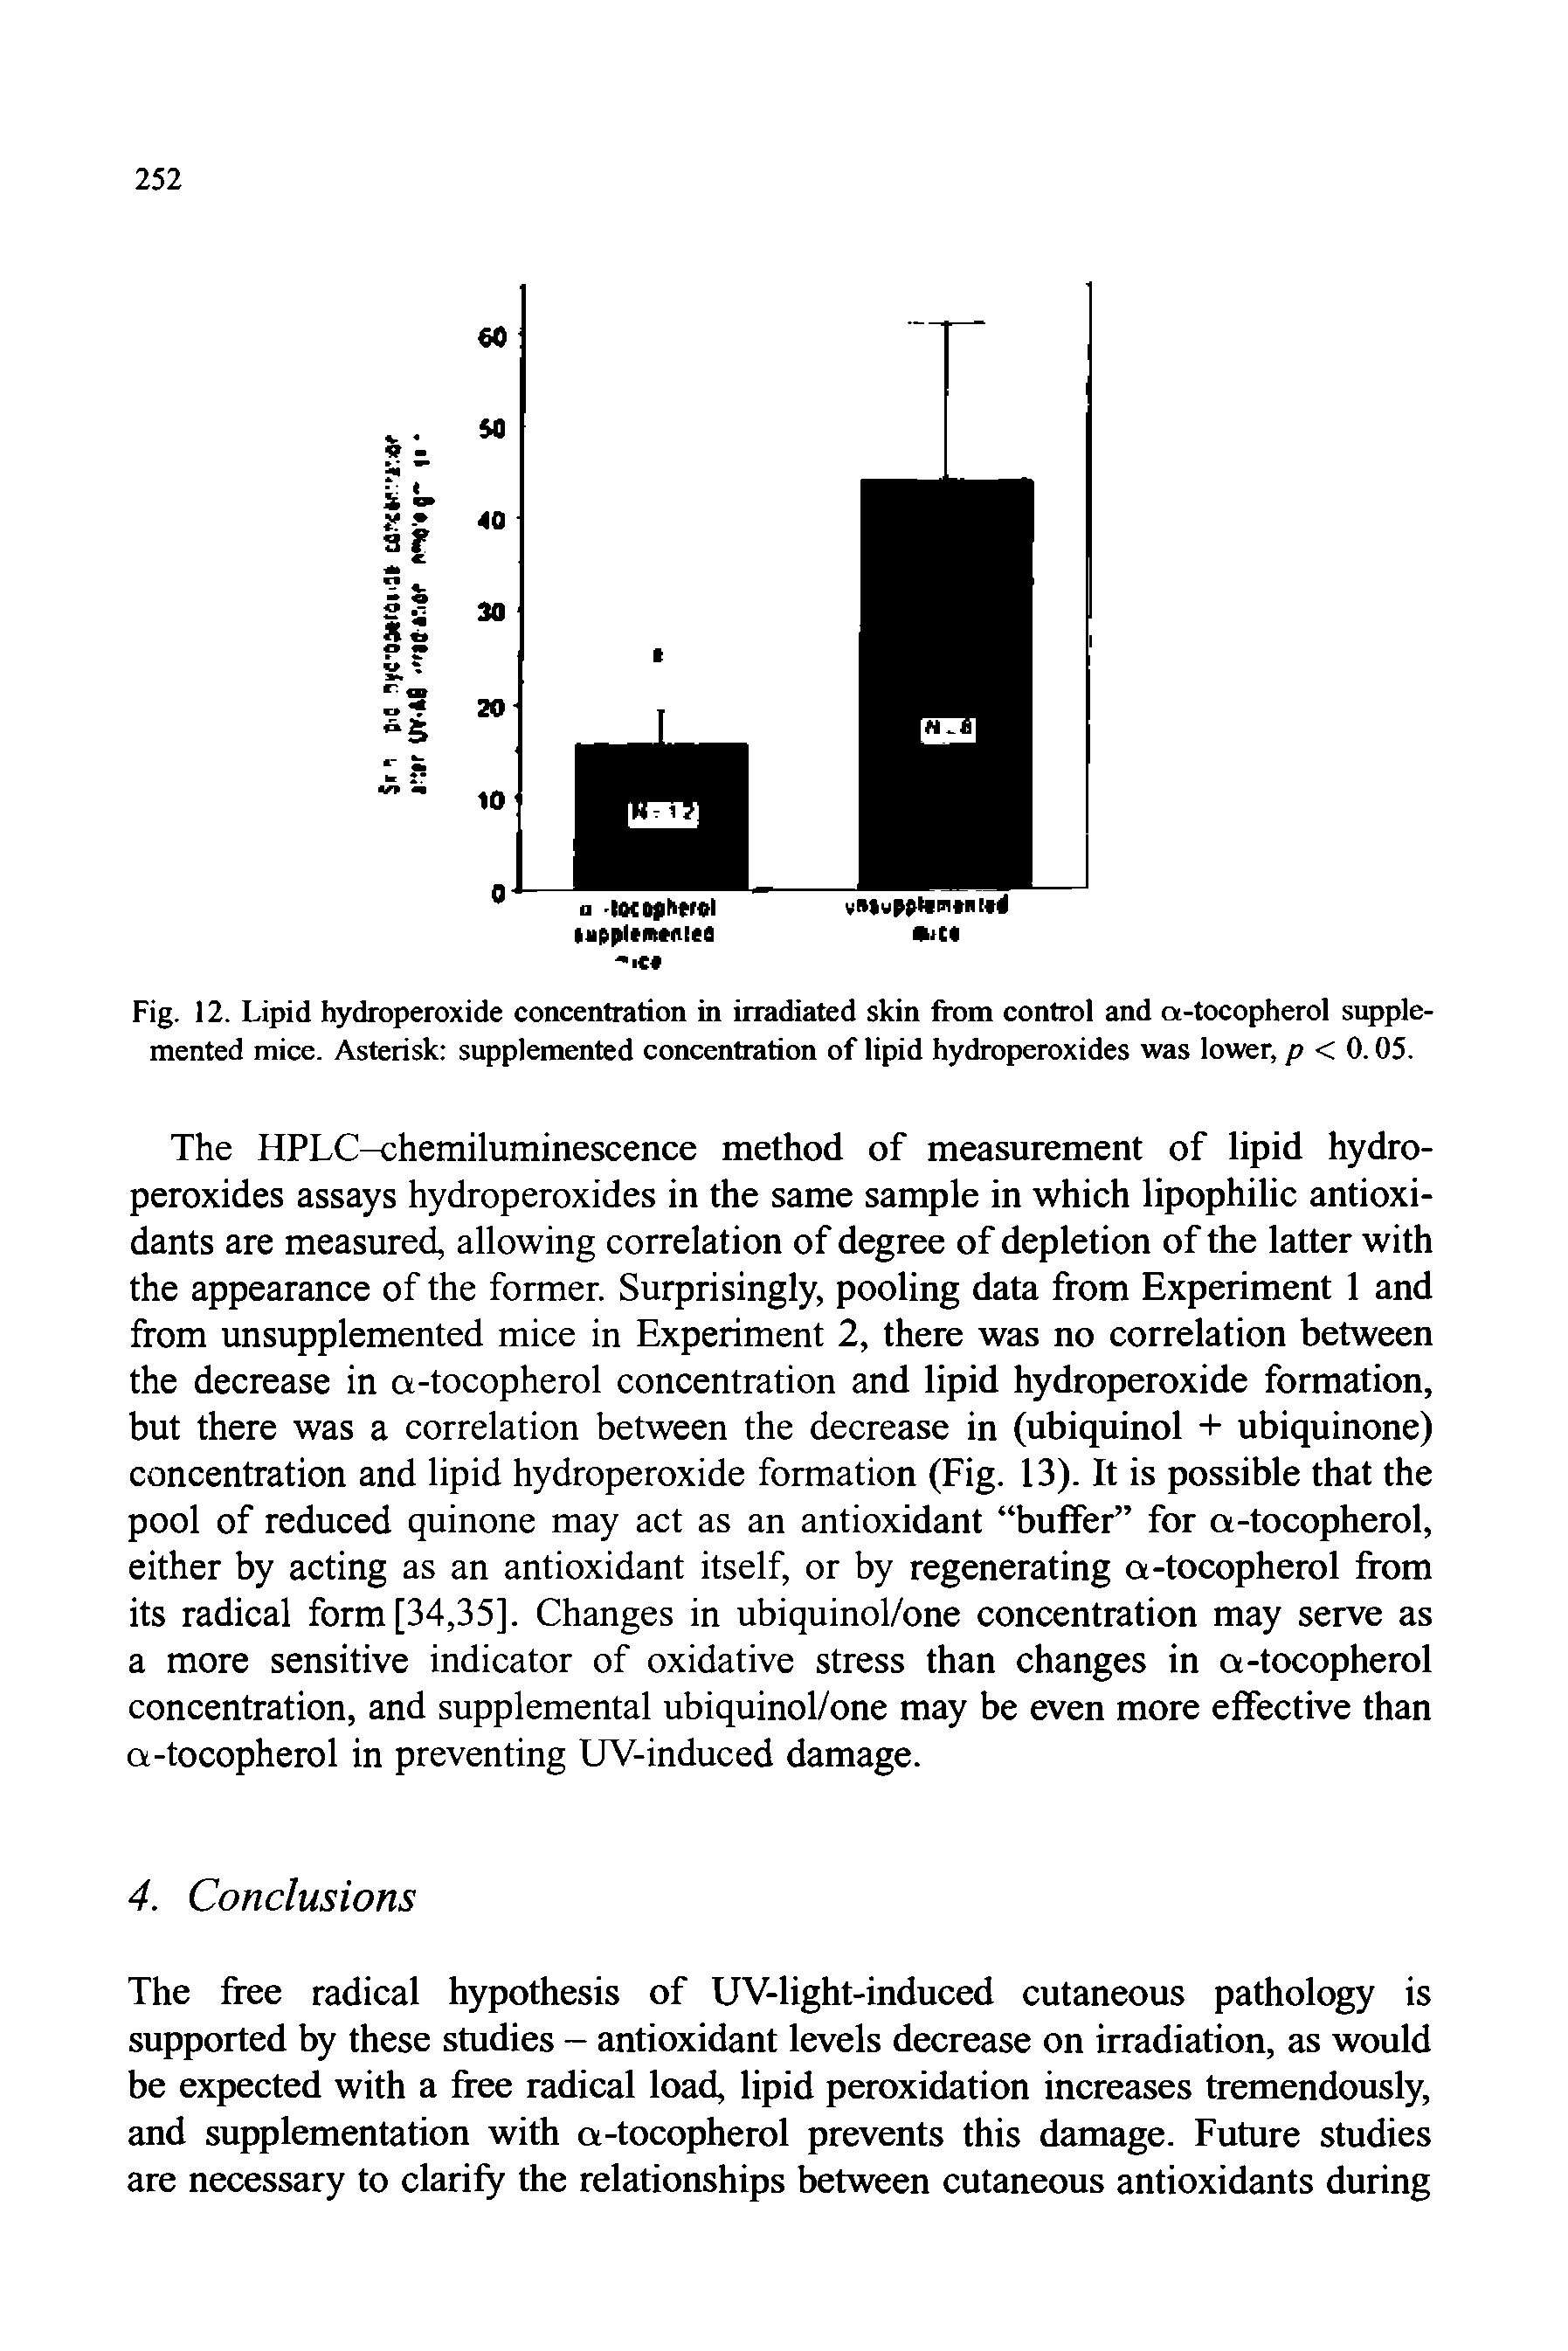 Fig. 12. Lipid hydroperoxide concentration in irradiated skin from control and a-tocopherol supplemented mice. Asterisk supplemented concentration of lipid hydroperoxides was lower, p < 0.05.